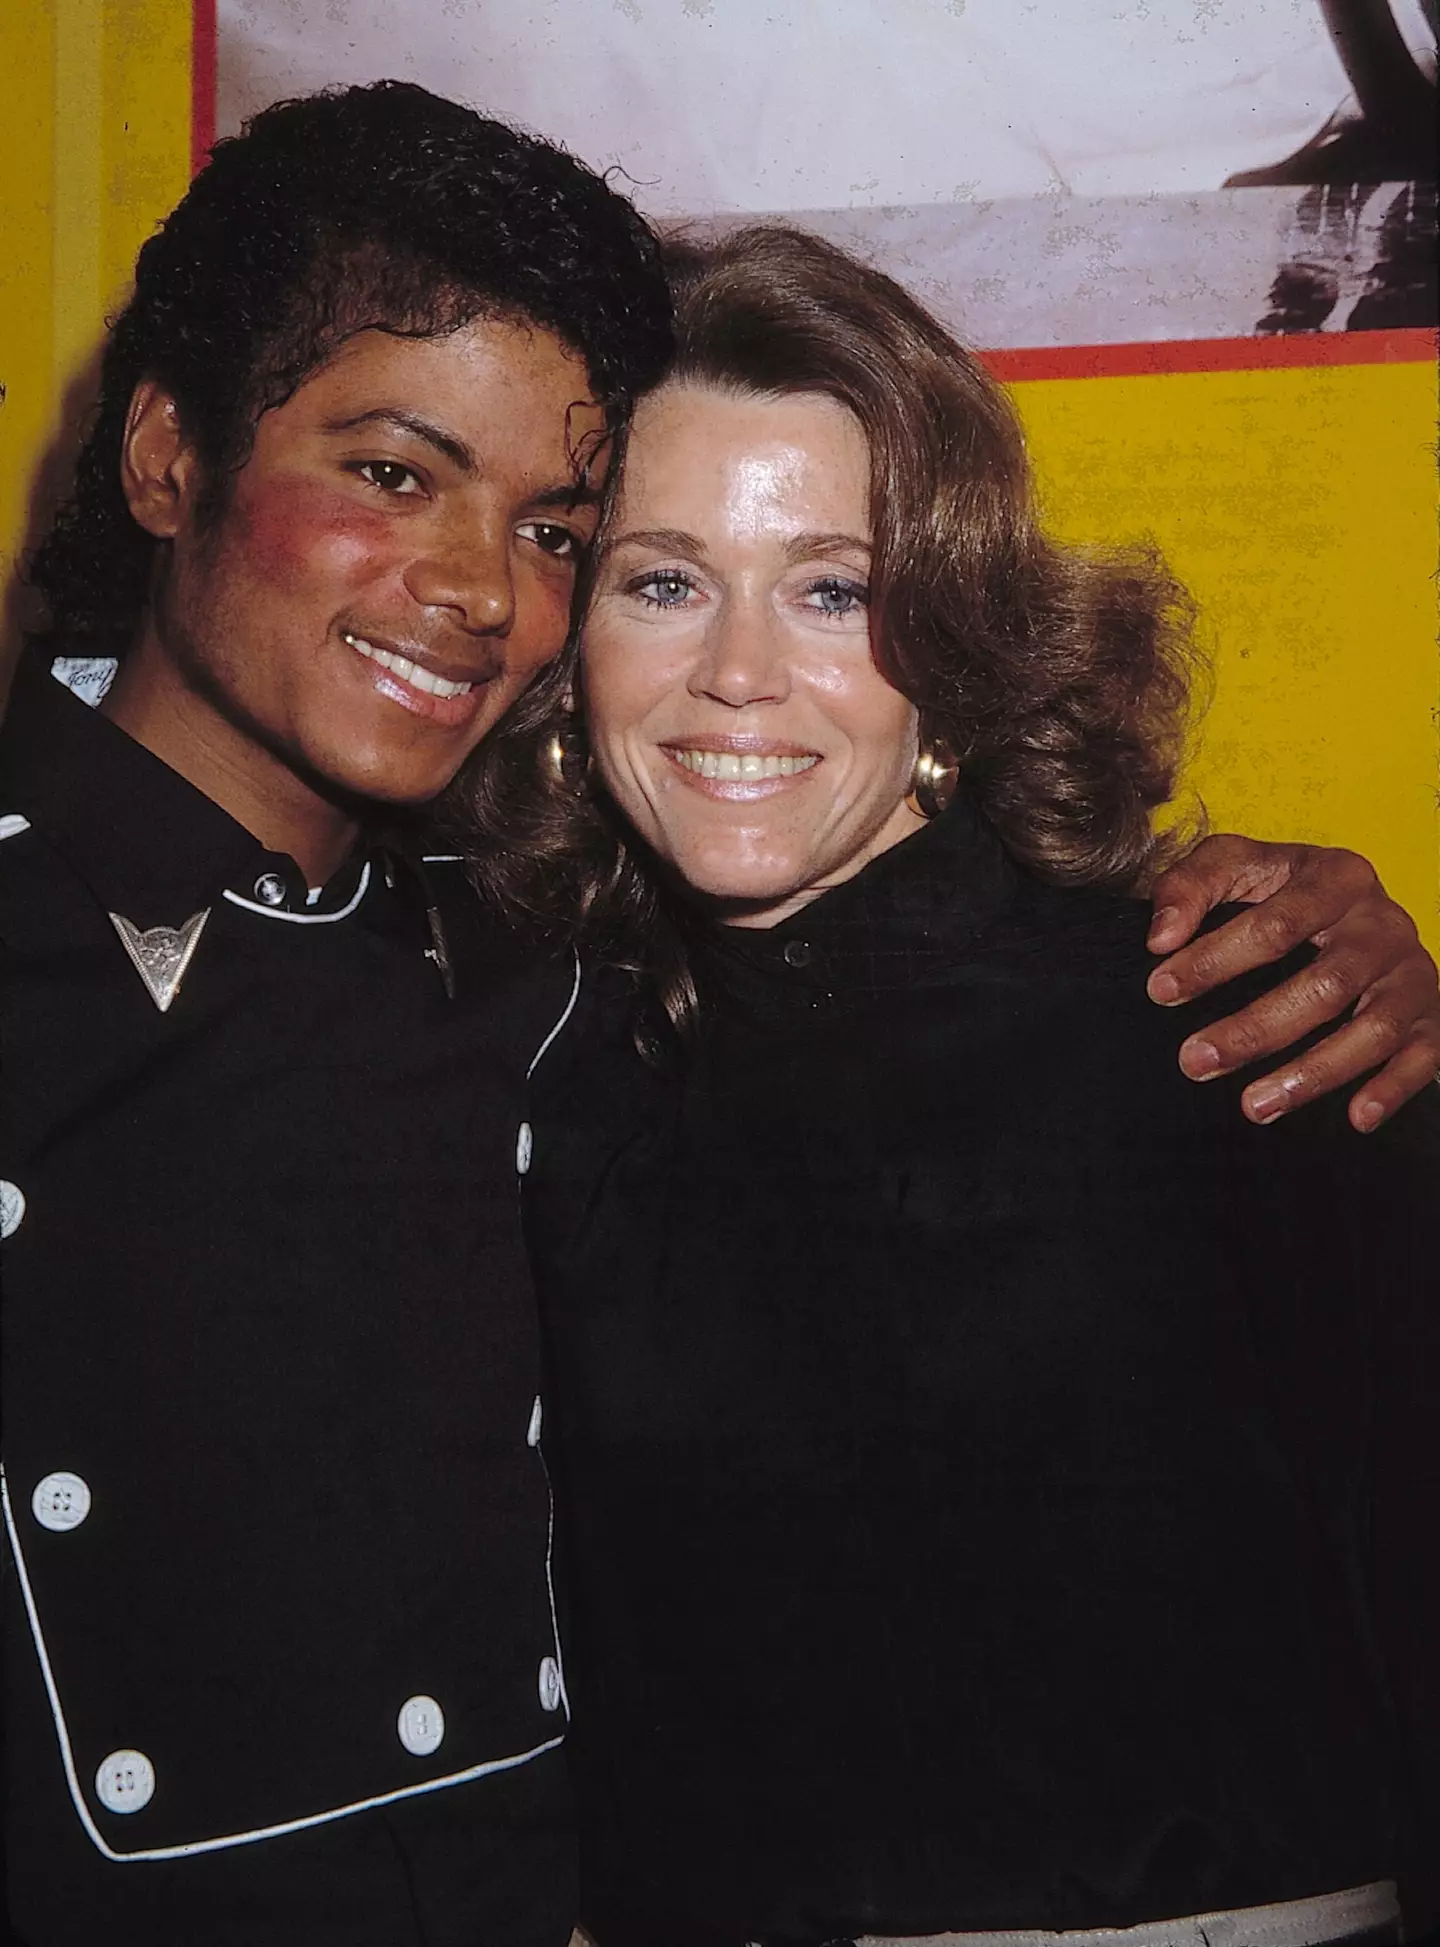 Jane revealed that she had been naked with Michael Jackson.